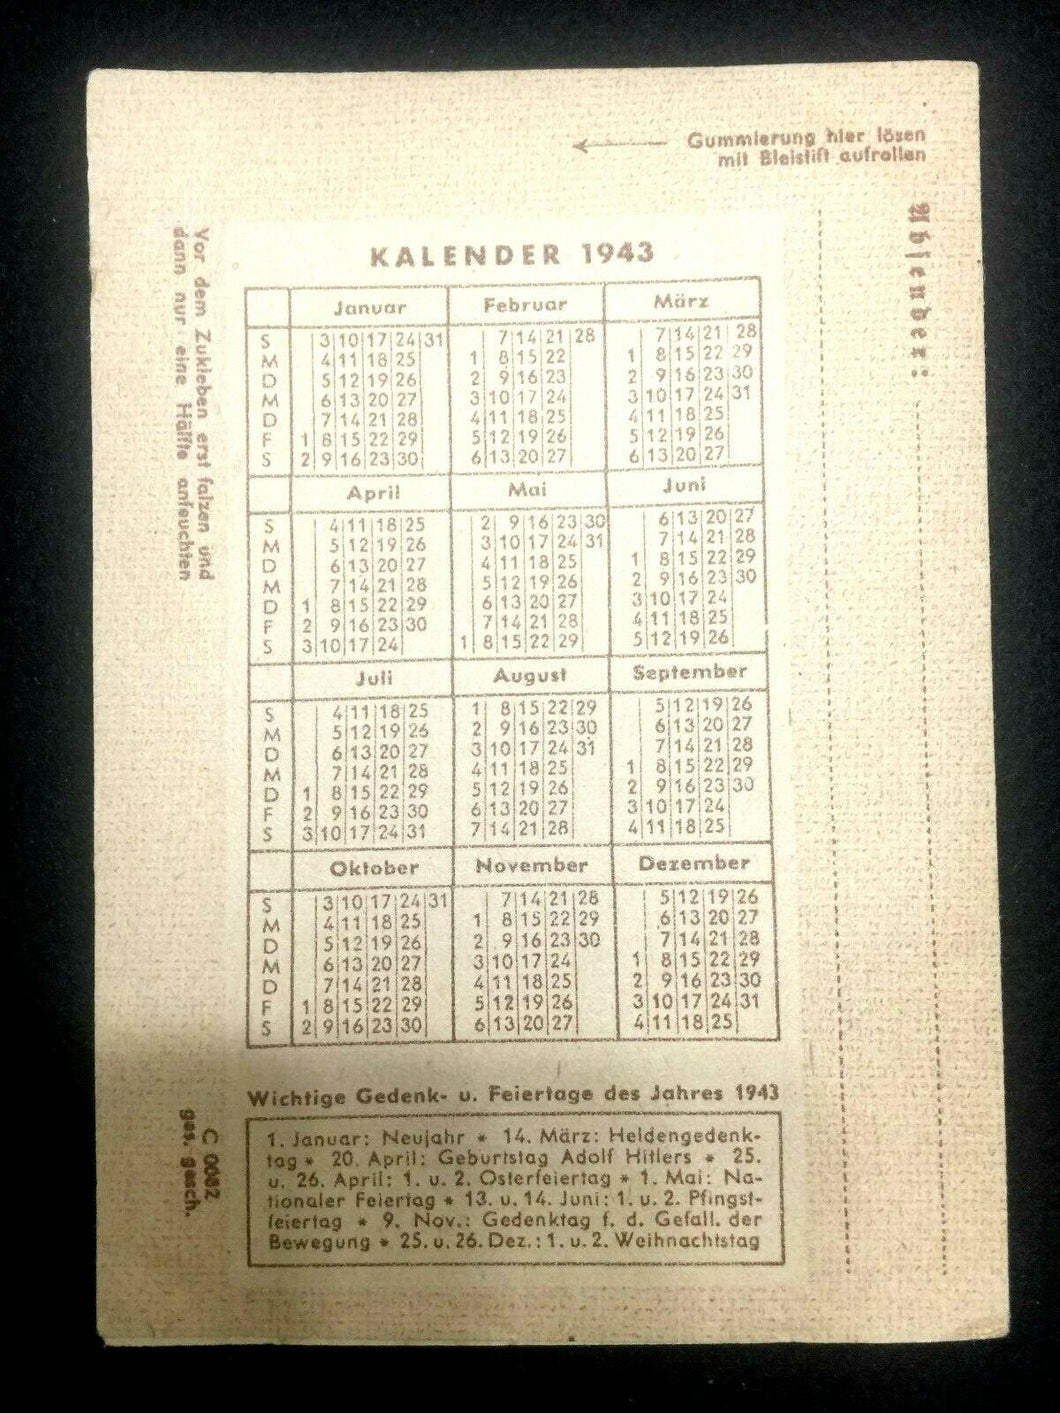 Authentic German 1943 - Uncirculated Letter Post Card with 1943 Calendar - Rare